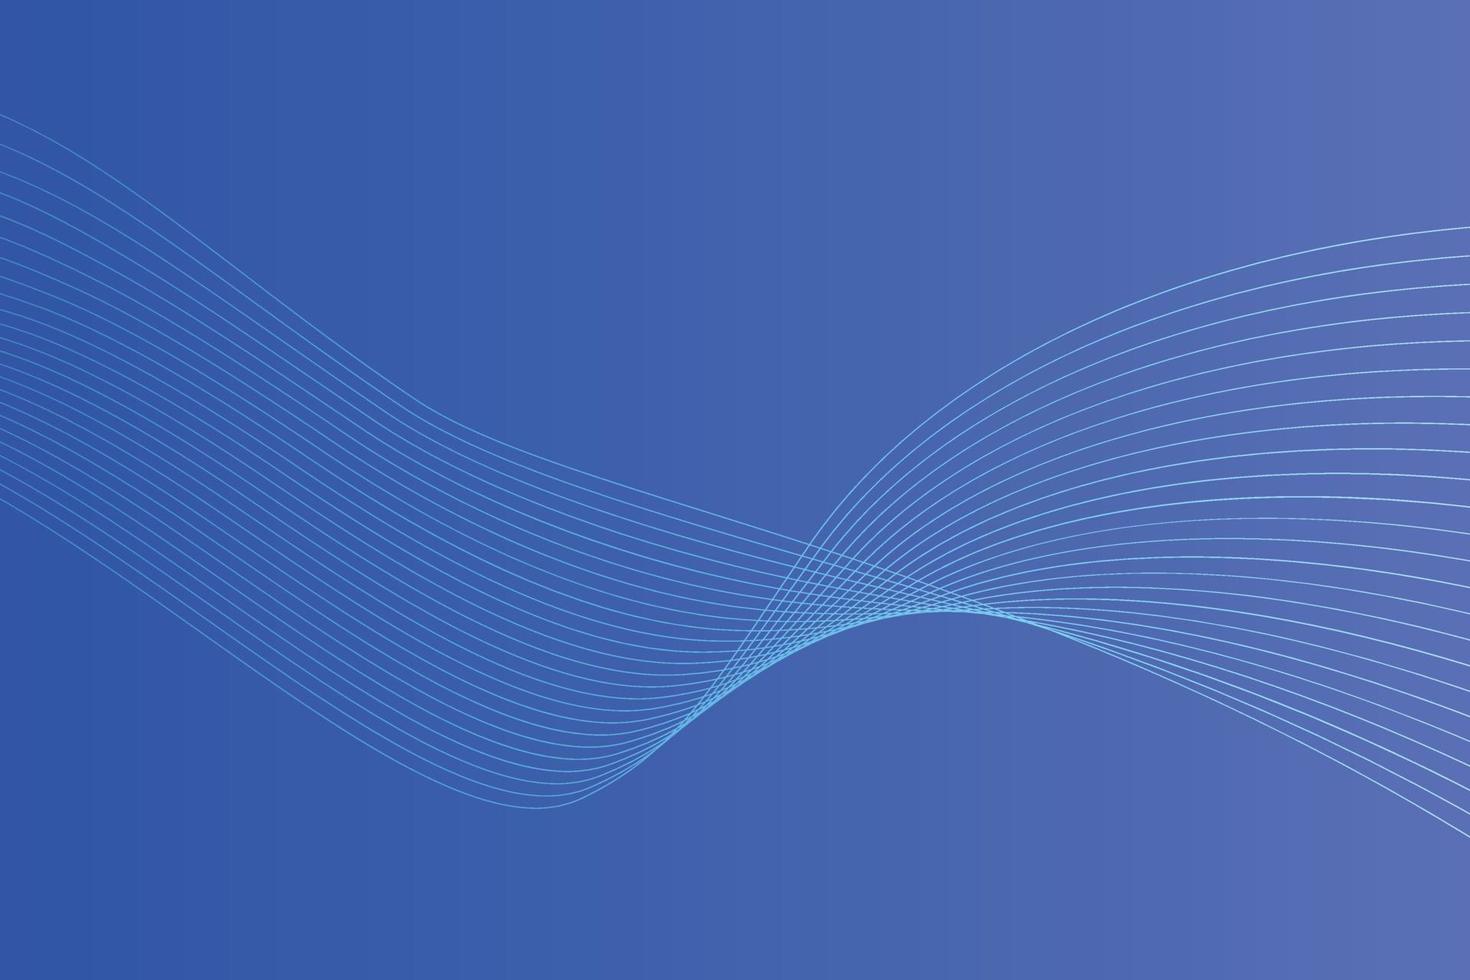 Abstract background with colorful wavy lines. Abstract Blue gradient background design vector